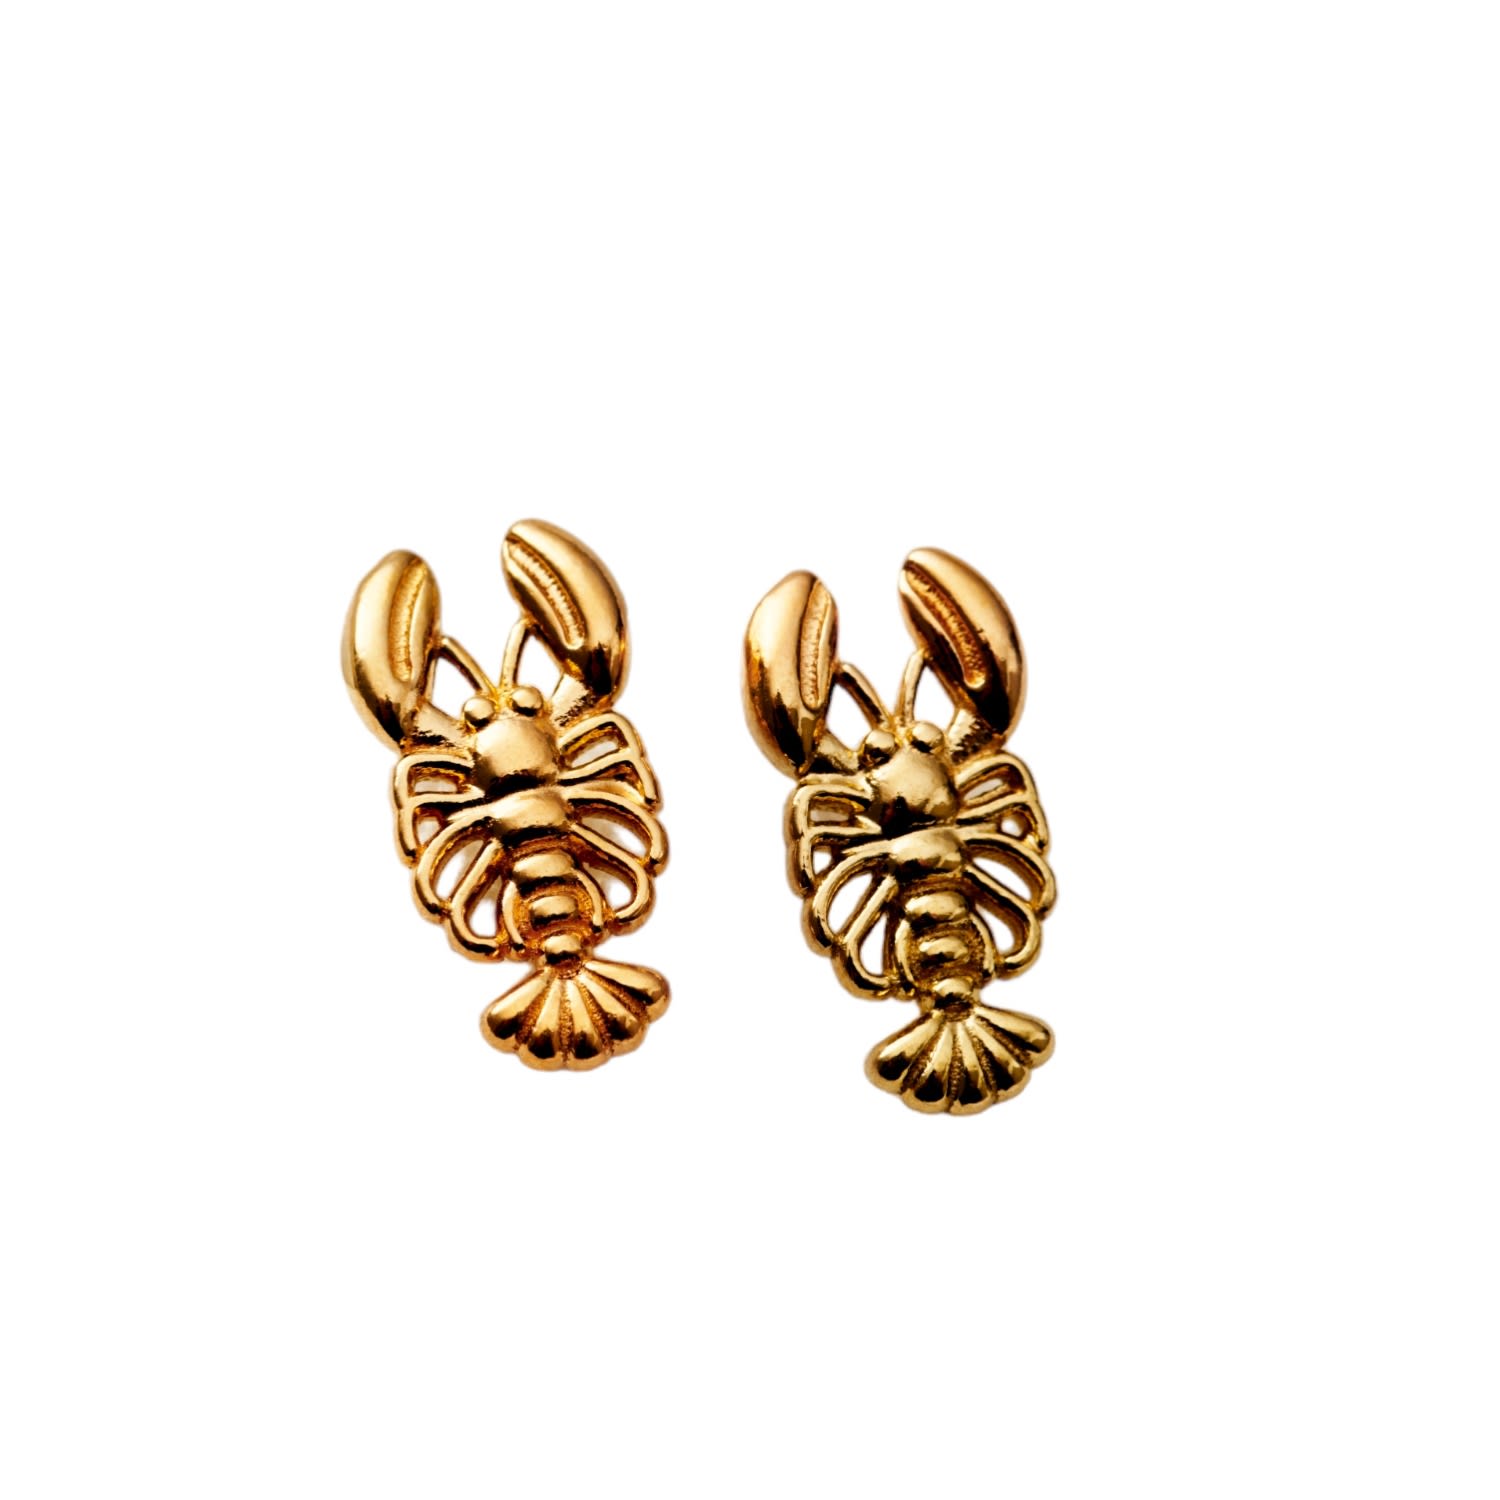 Posh Totty Designs Women's Yellow Gold Plated Lobster Stud Earrings